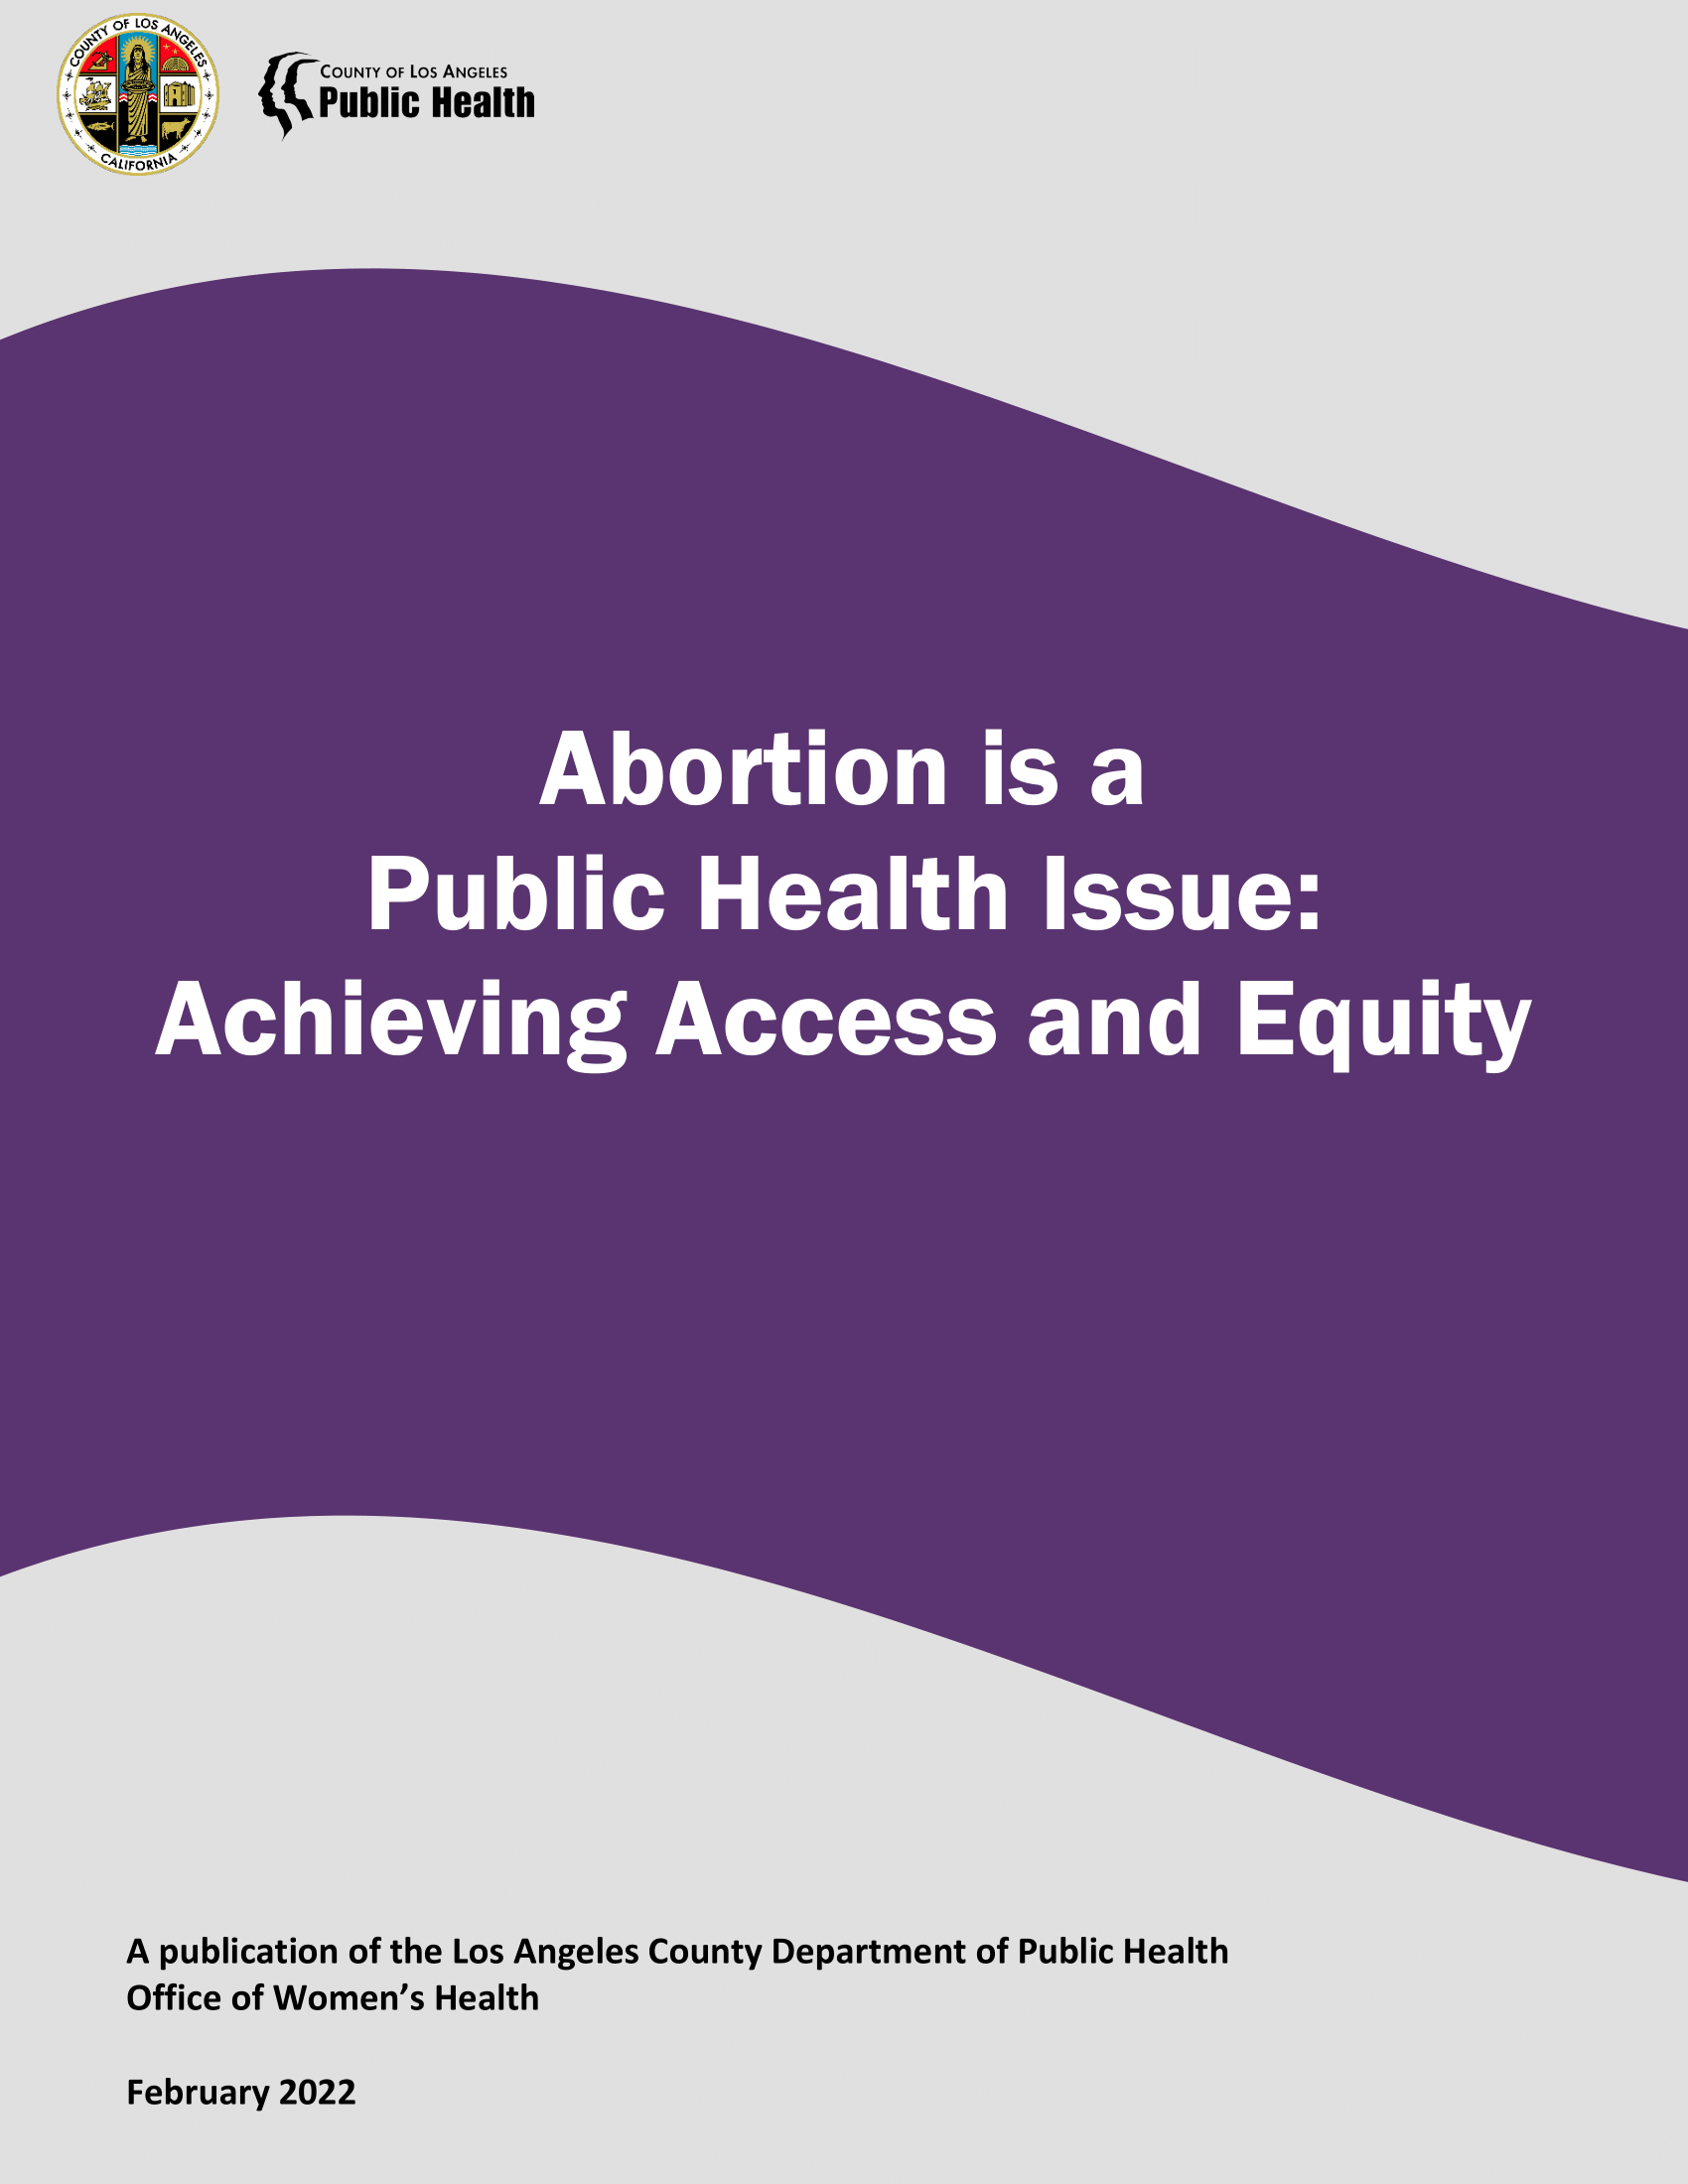 ABORTION IS A PUBLIC HEALTH ISSUE: ACHIEVING ACCESS AND EQUITY